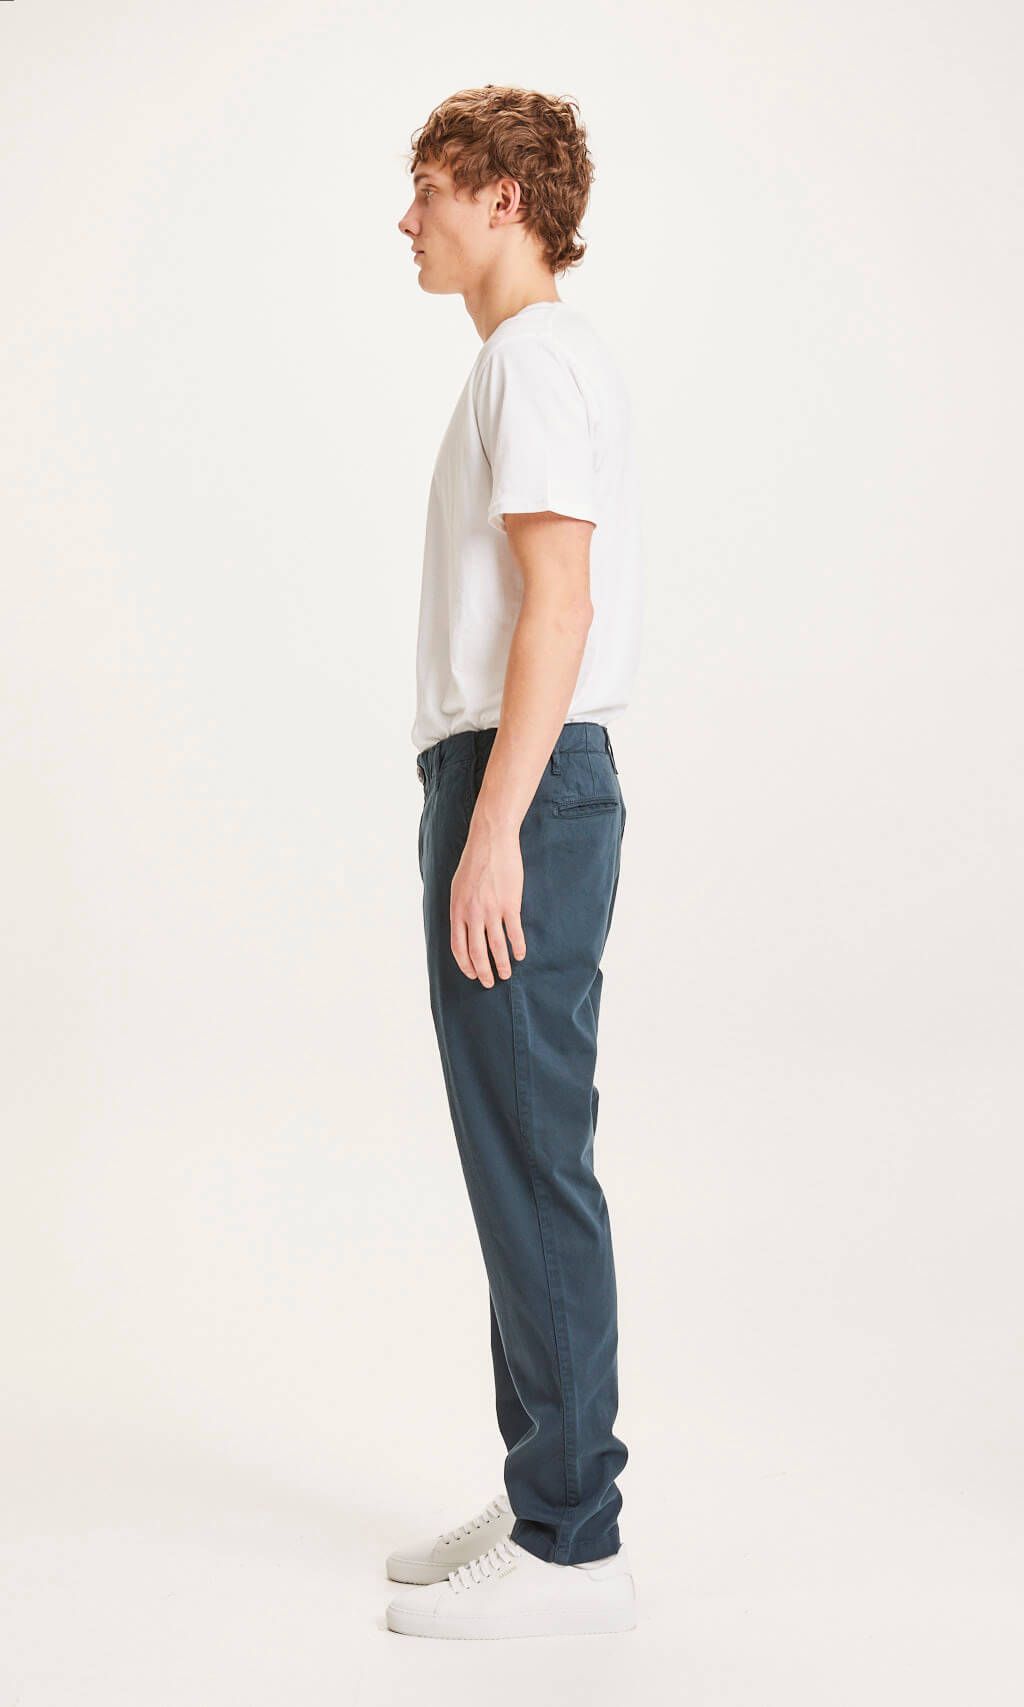 Chuck Regular Stretched Chino Pant Total Eclipse 33/30